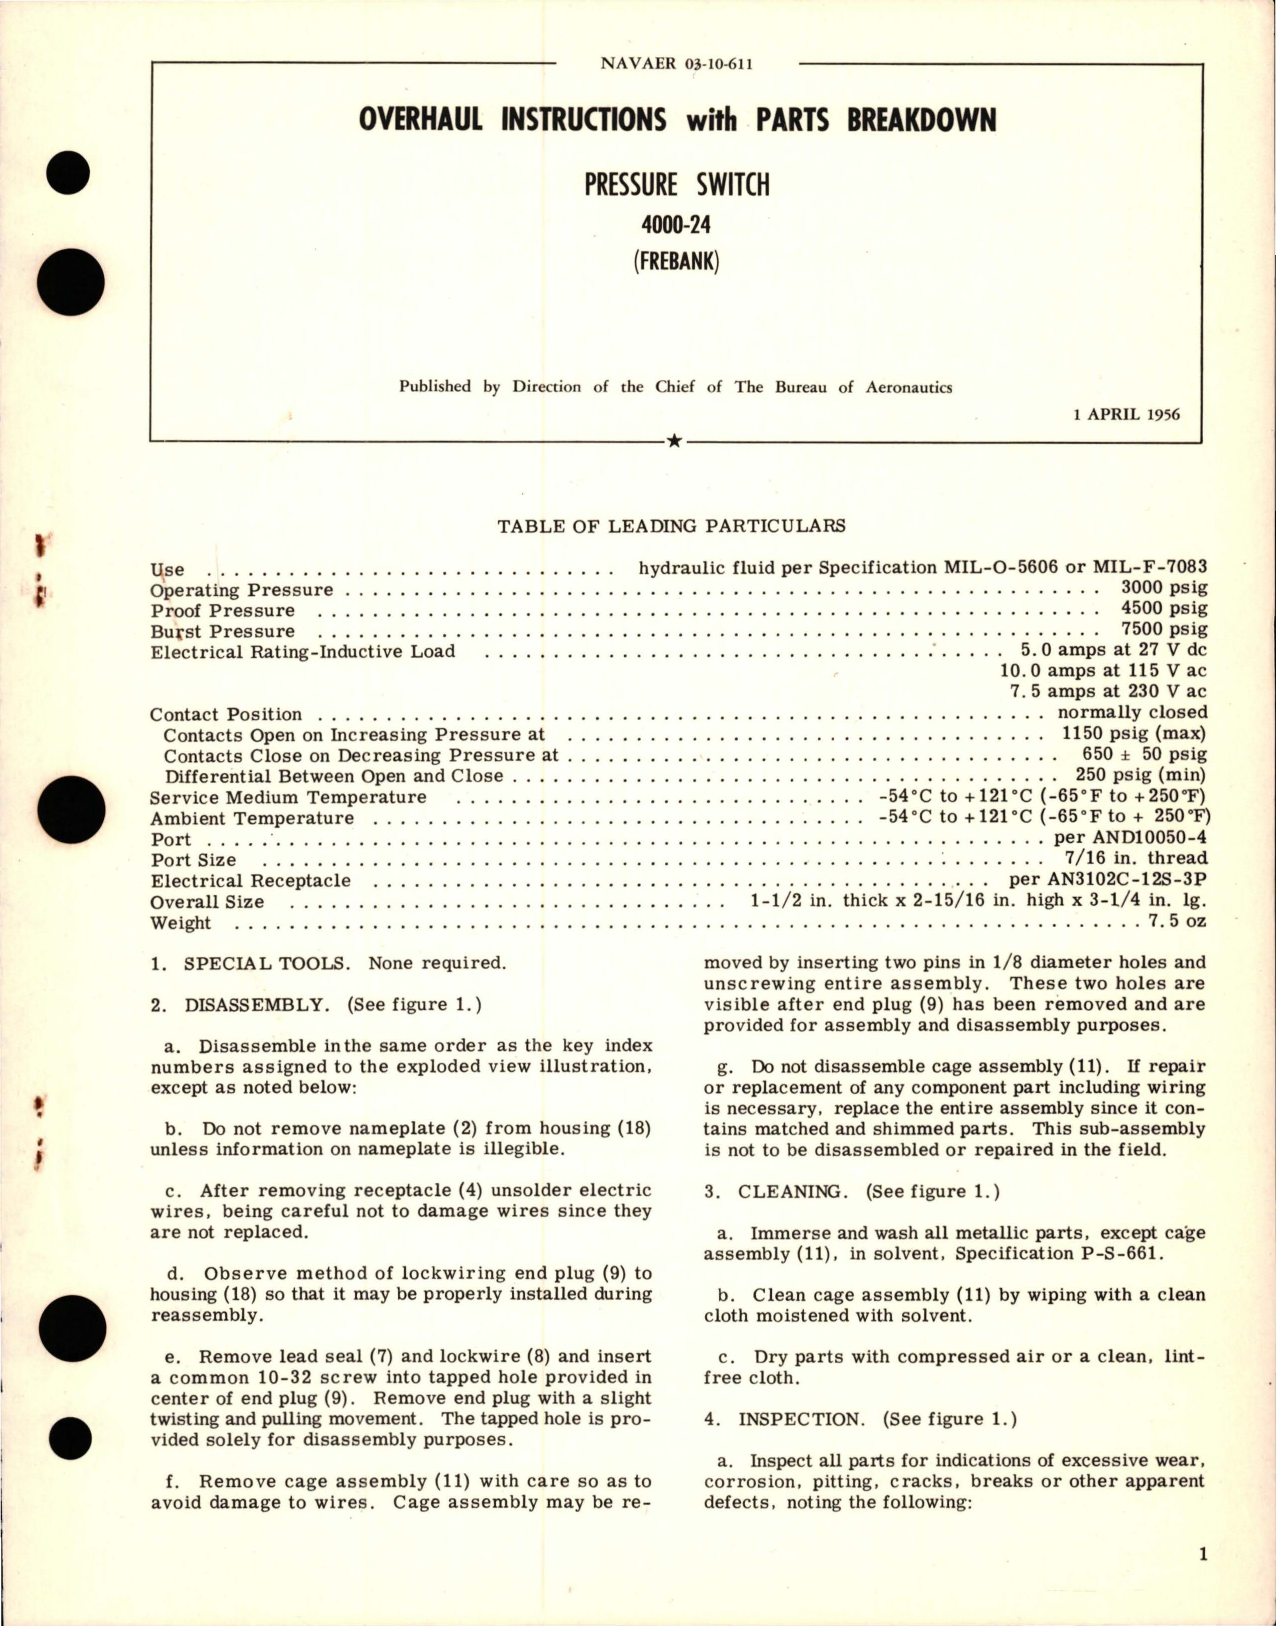 Sample page 1 from AirCorps Library document: Overhaul Instructions with Parts Breakdown for Pressure Switch - 4000-24 